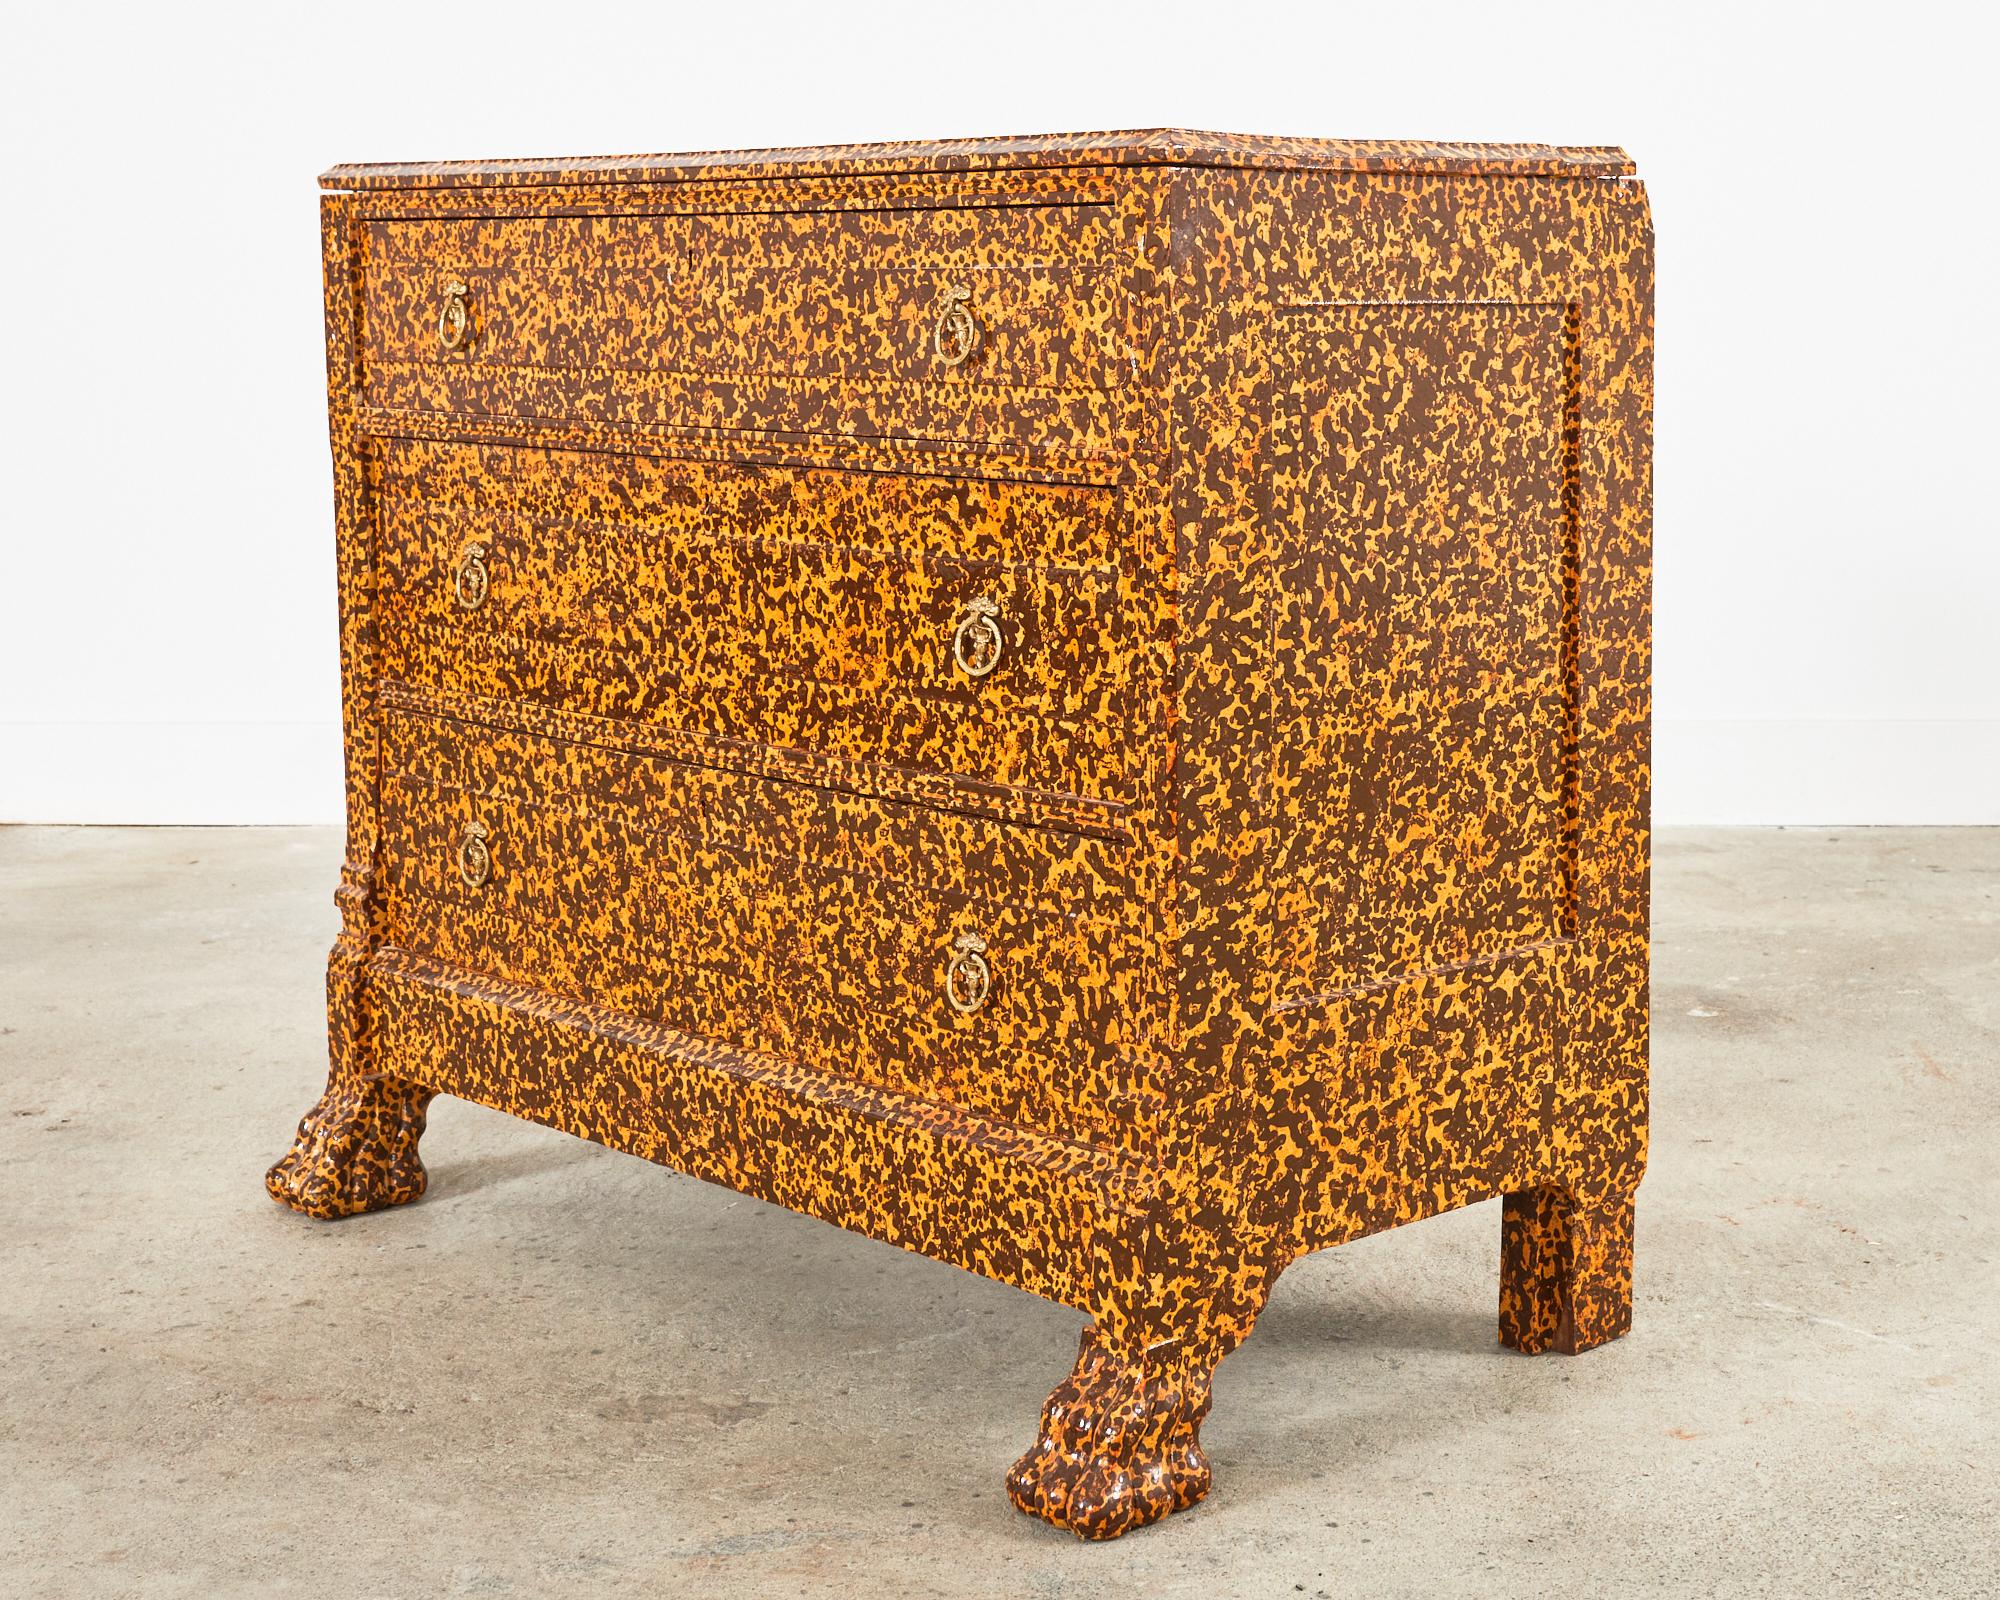 French 19th Century Empire Style Commode Spreckled by Ira Yeager